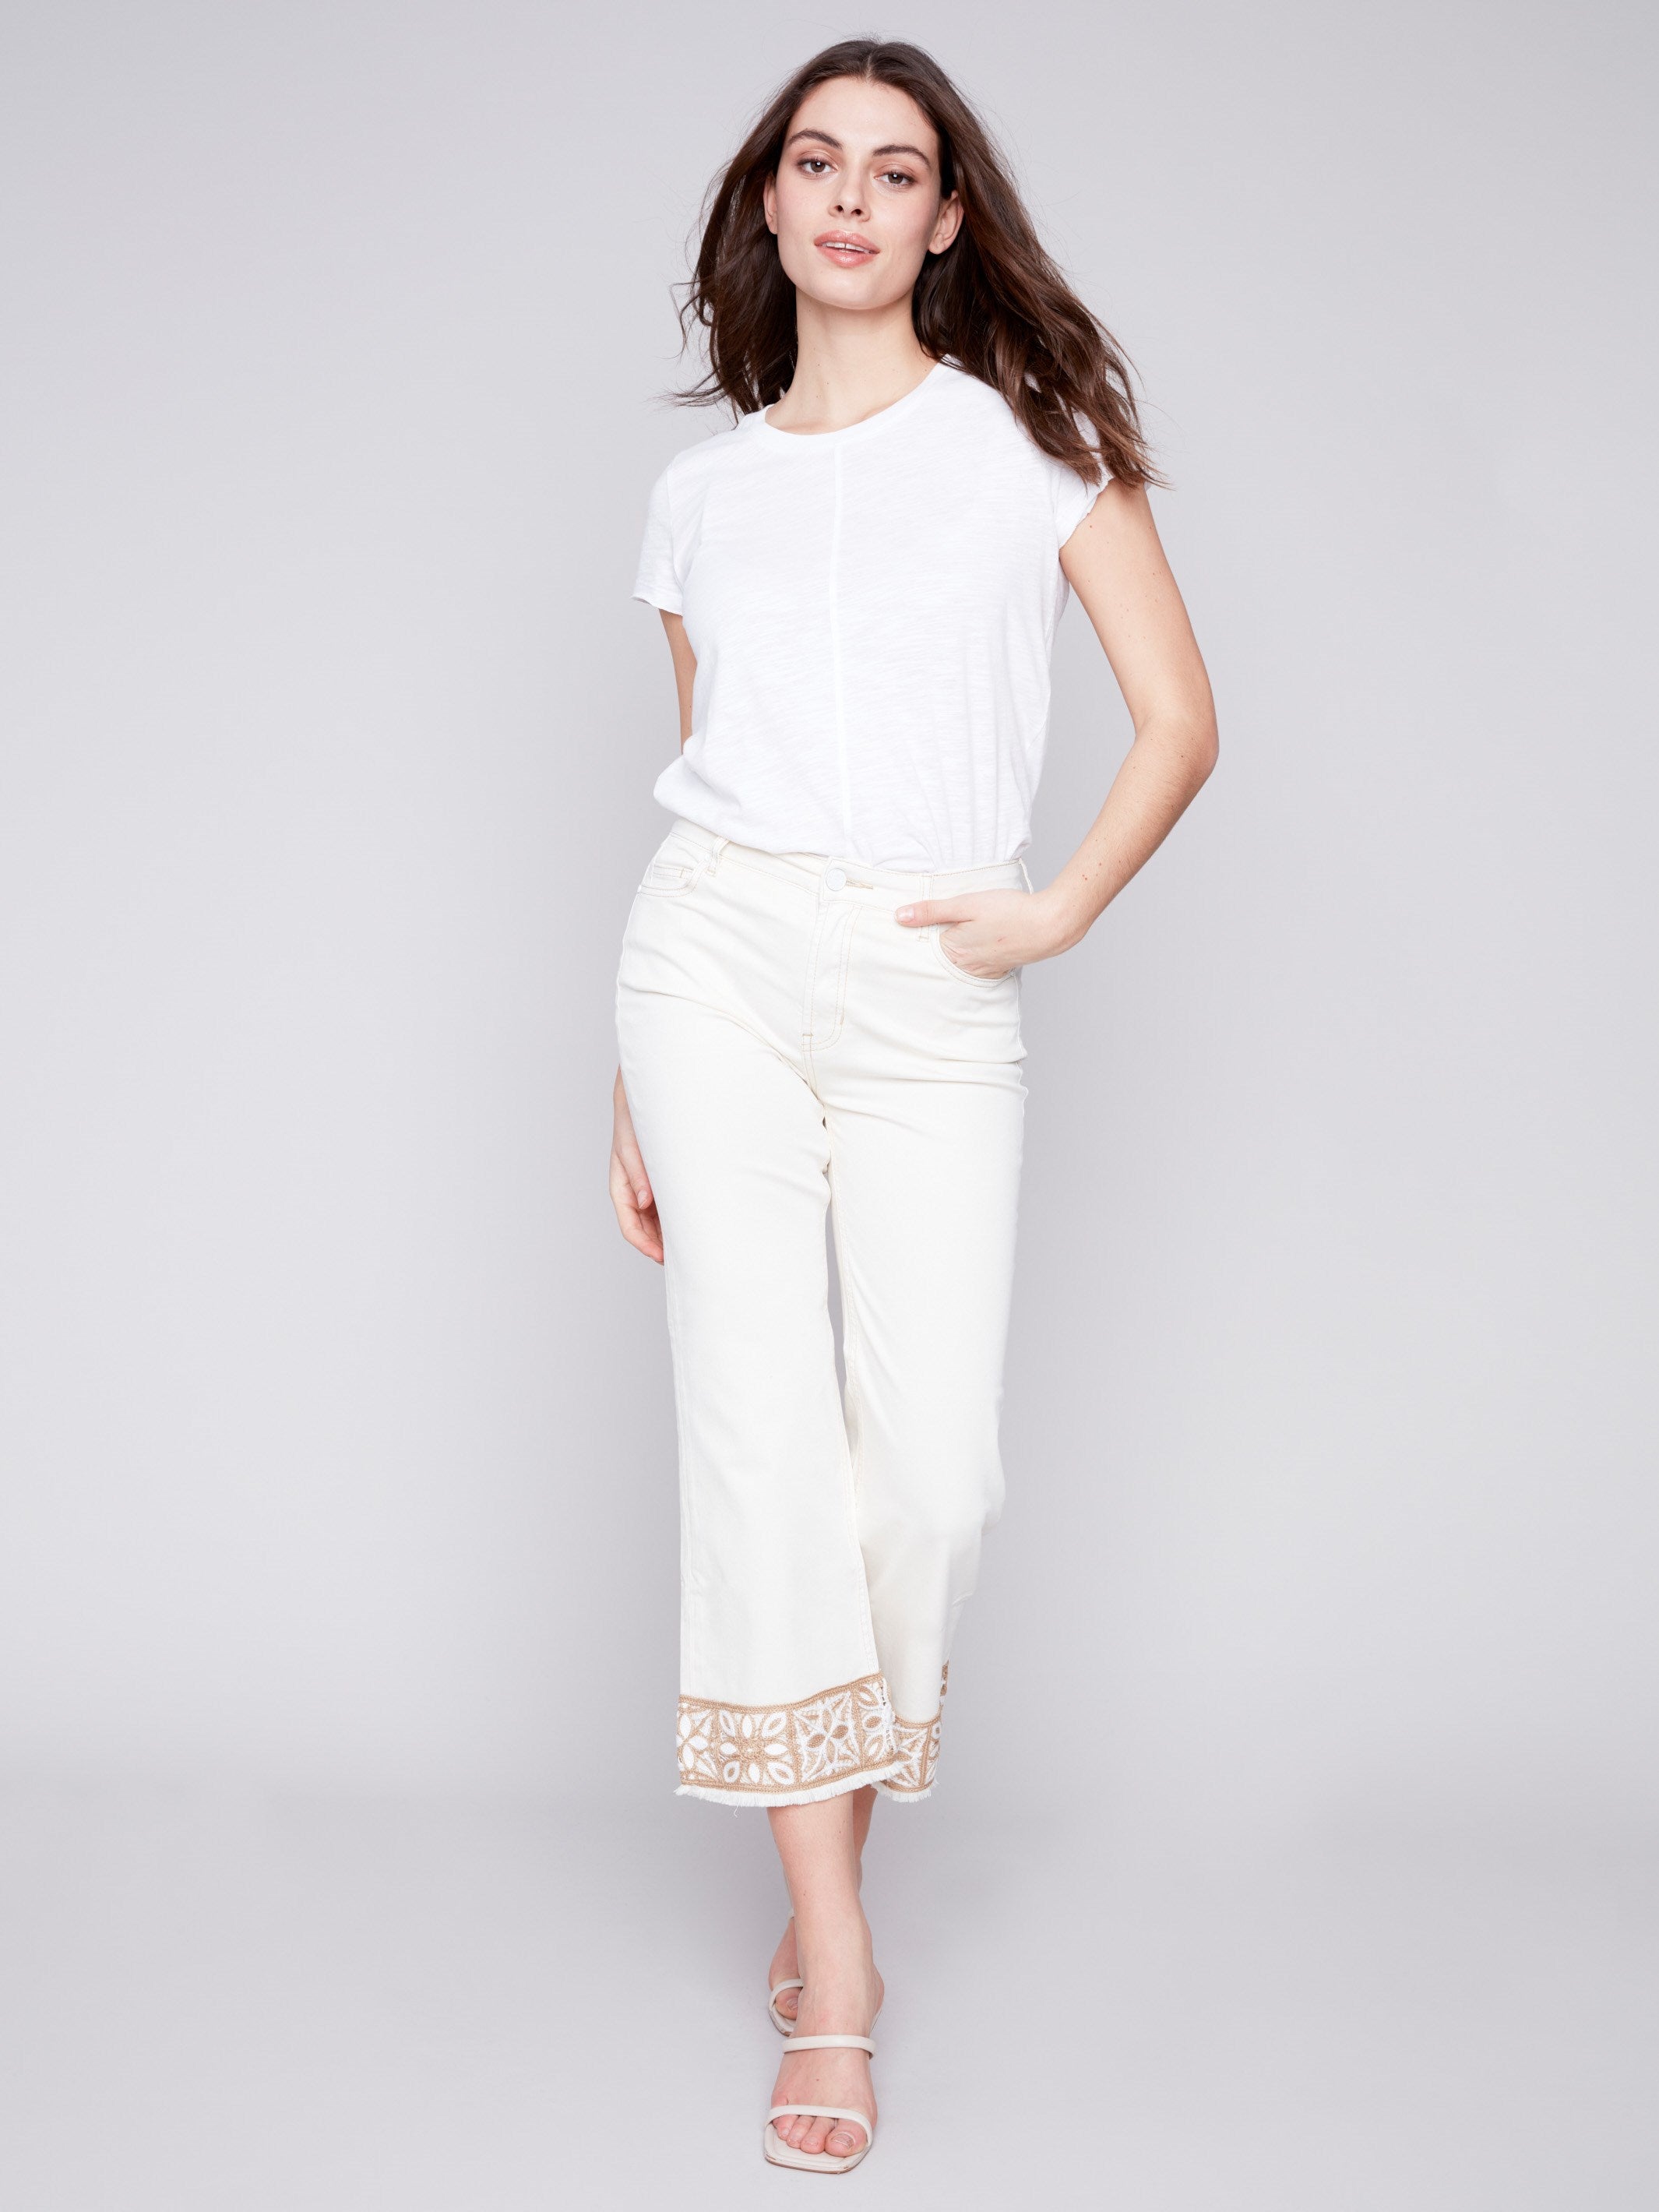 Charlie B Twill Pants with Crochet Cuff - Natural - Image 4